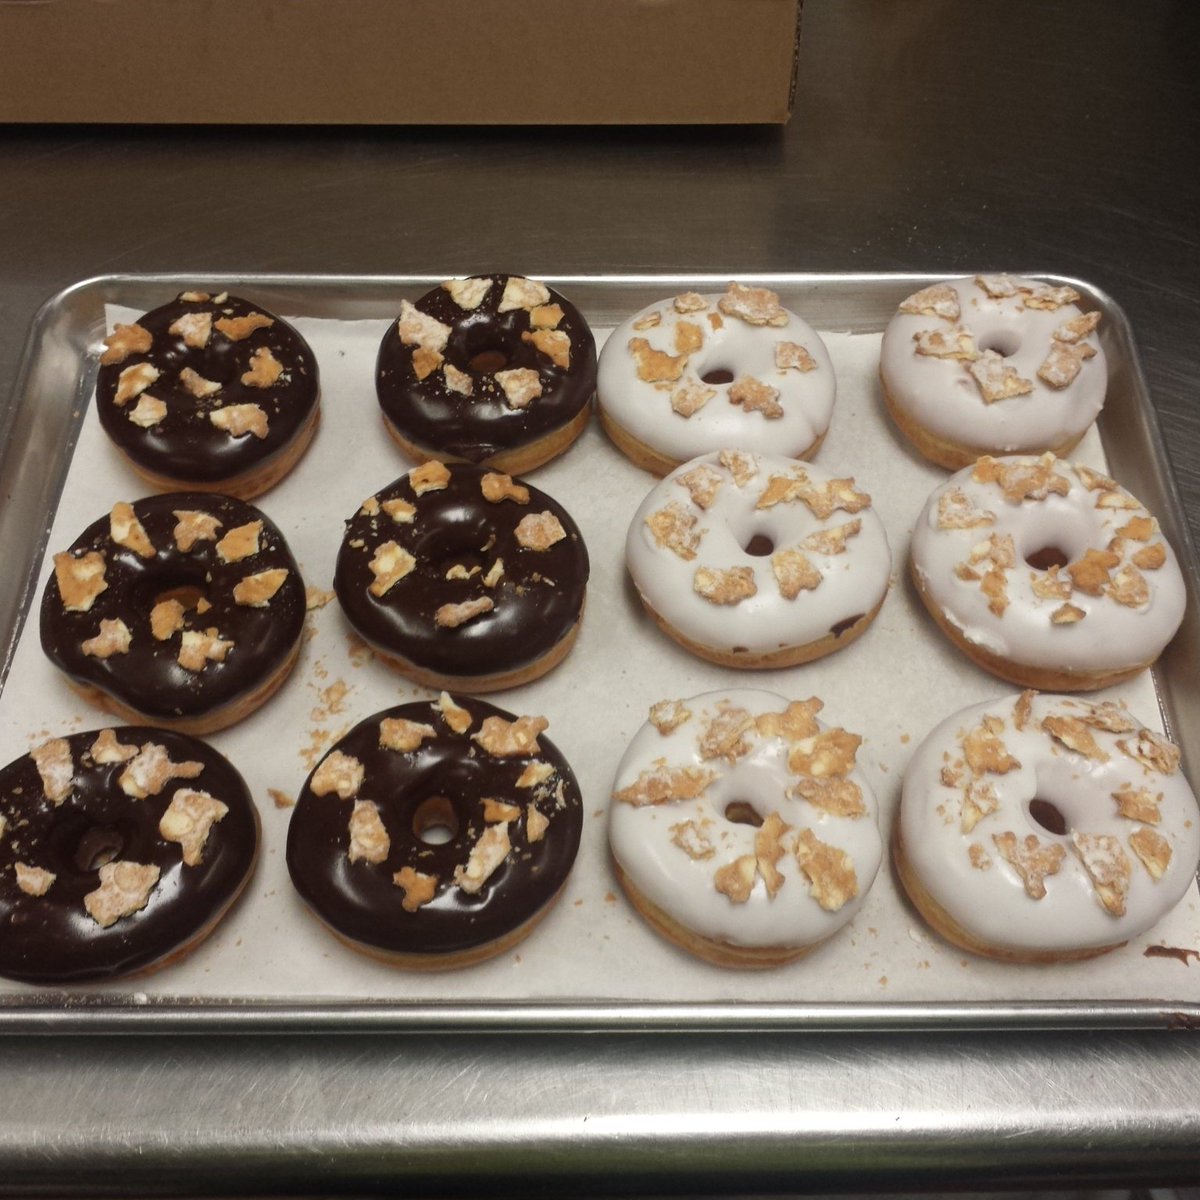 Here come the Donnoli.  Come try something new.  @thedonutstation 
#treatyourself #donuts #cannoli #easterfun